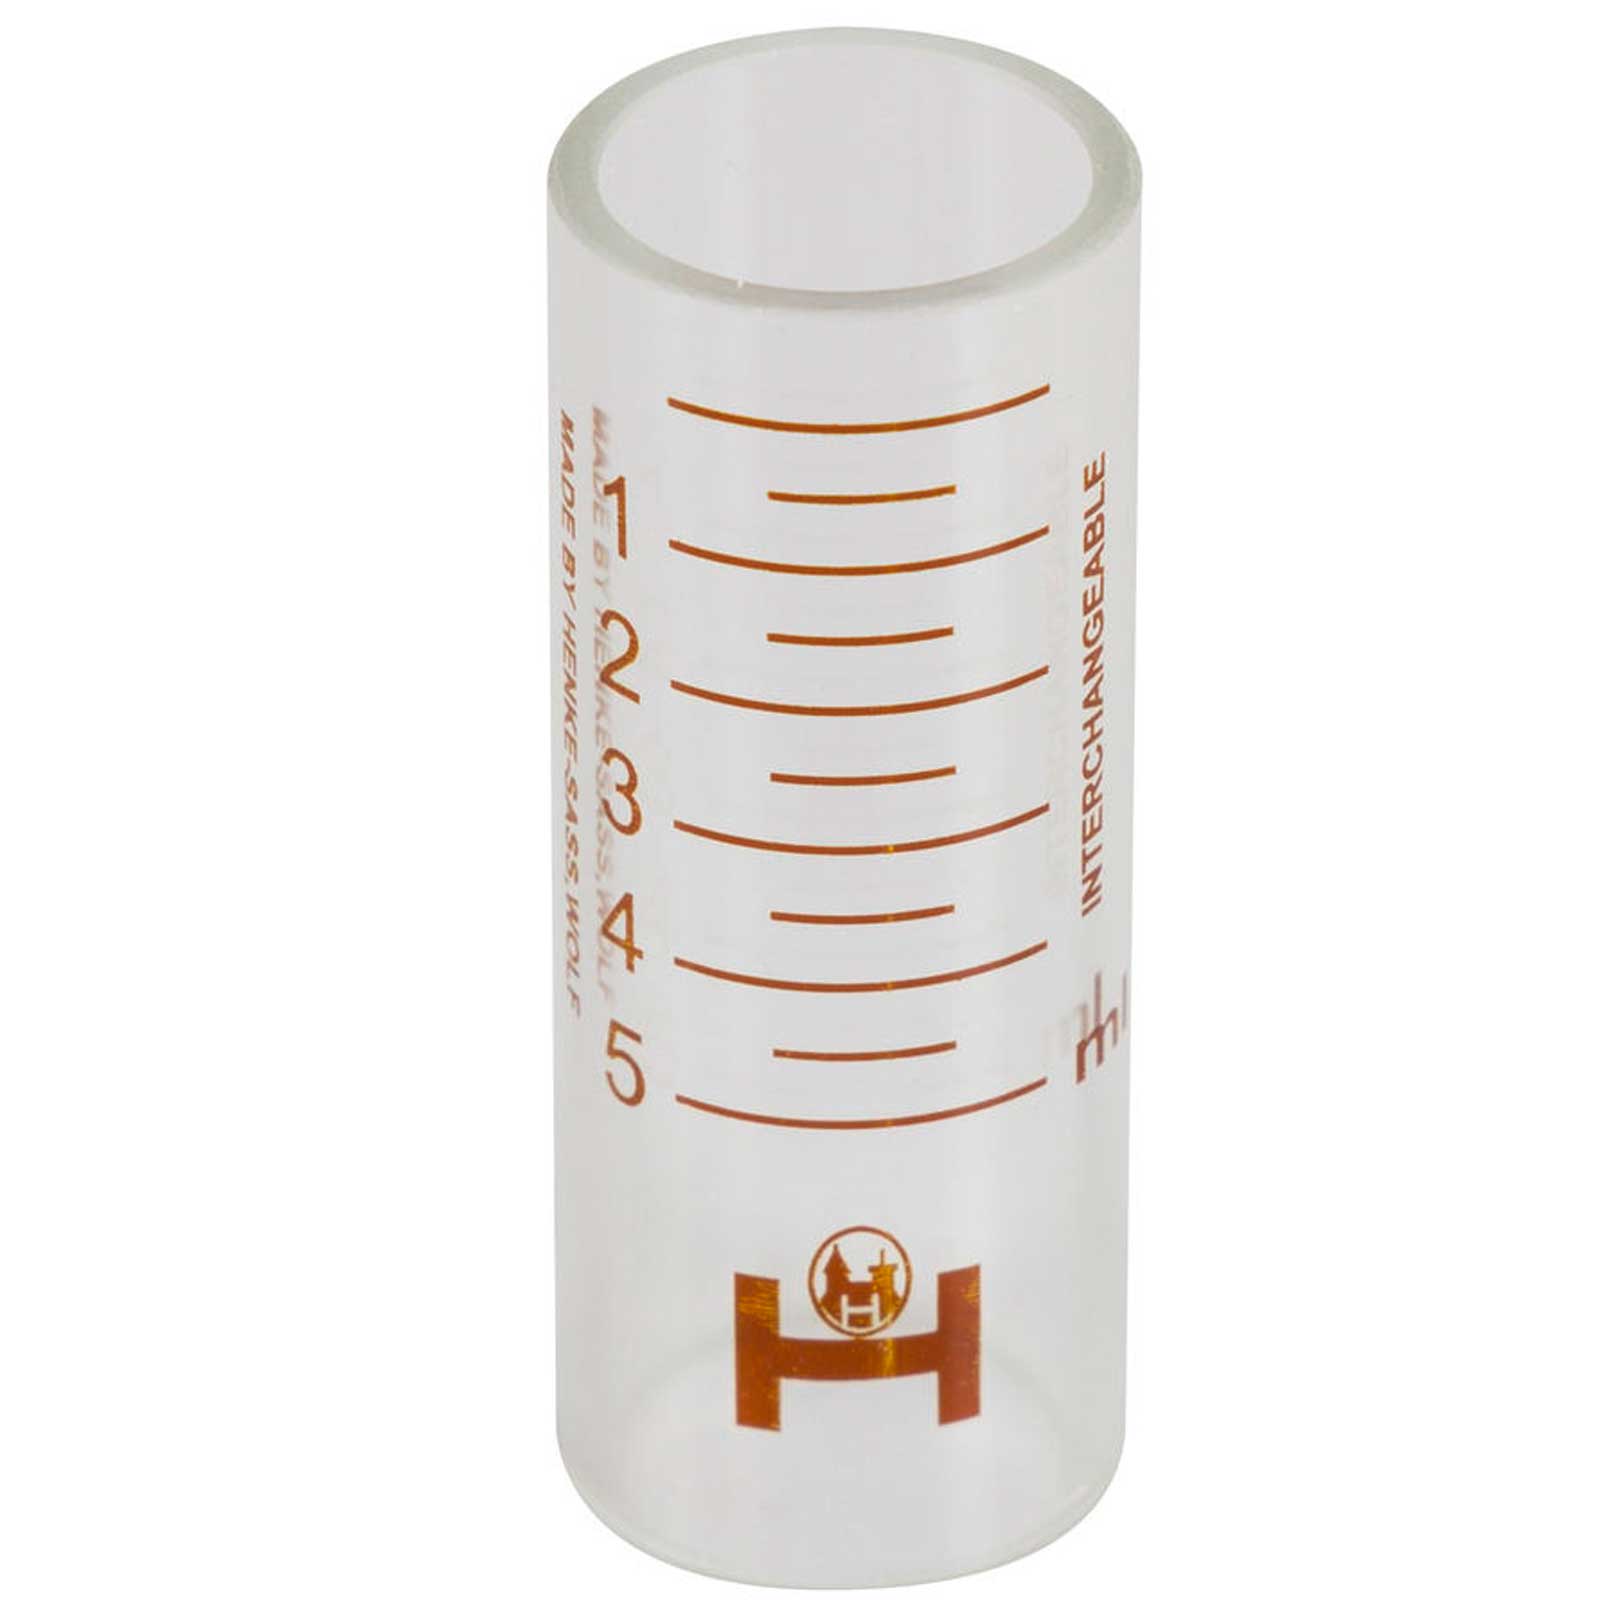 HSW replacement cylinder for FERRO-MATIC 5 ml